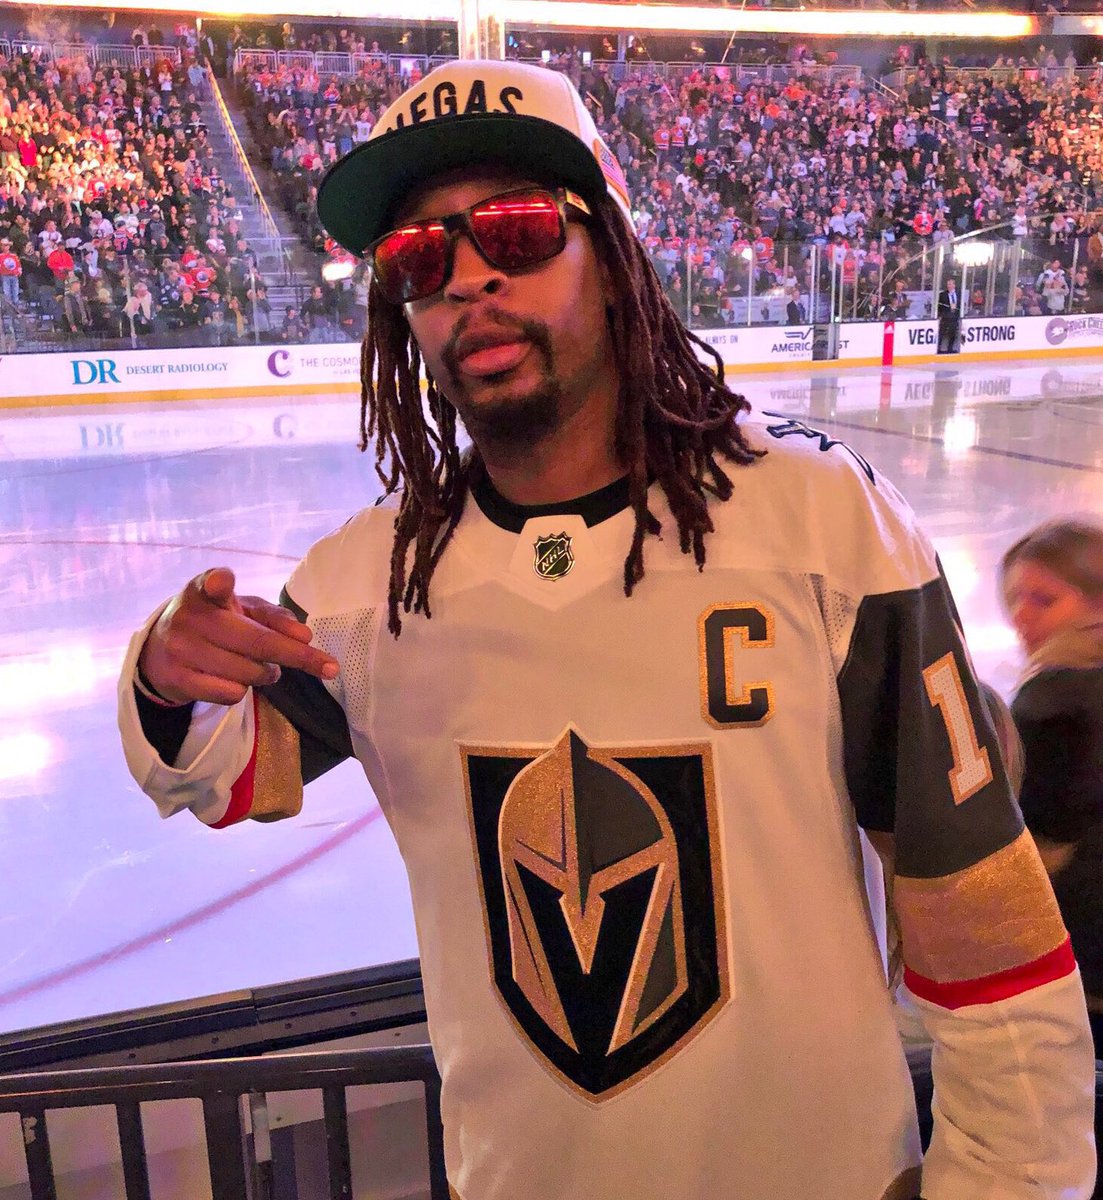 RT @GoldenKnights: our team has never had a player wear the C so we figured why not @LilJon? https://t.co/42tB5F335B